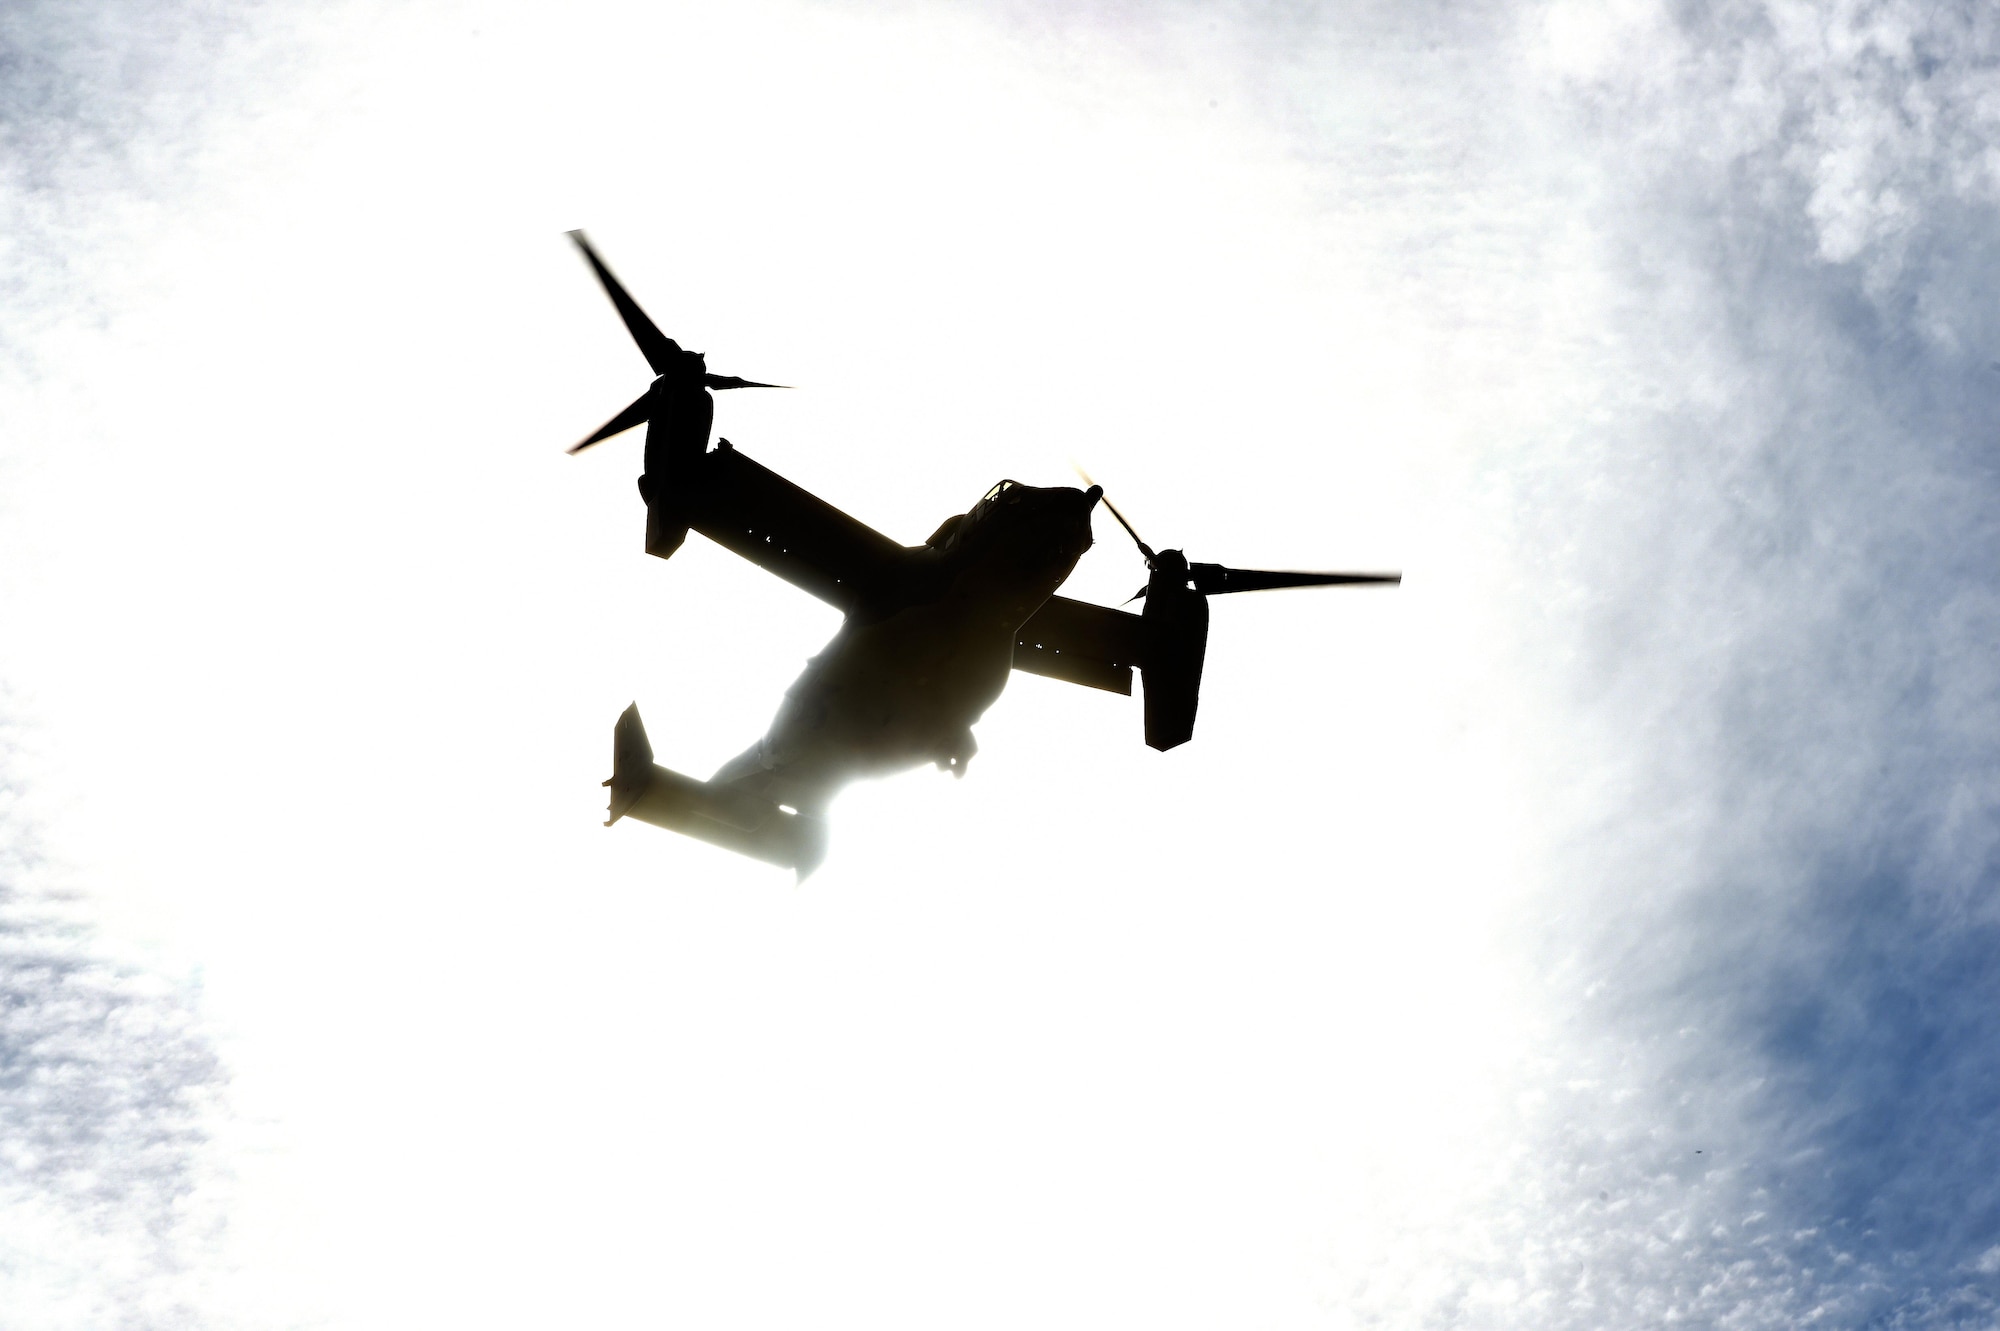 A CV-22 Osprey flies over Camp Shelby, Miss., during Task Force Exercise Southern Strike, Oct. 26, 2016. The CV-22 crews with the 8th Special Operations Squadron provided infiltration/exfiltration and fast-roping training for Naval Special Warfare personnel. (U.S. Air Force photo by Senior Airman Jeff Parkinson)